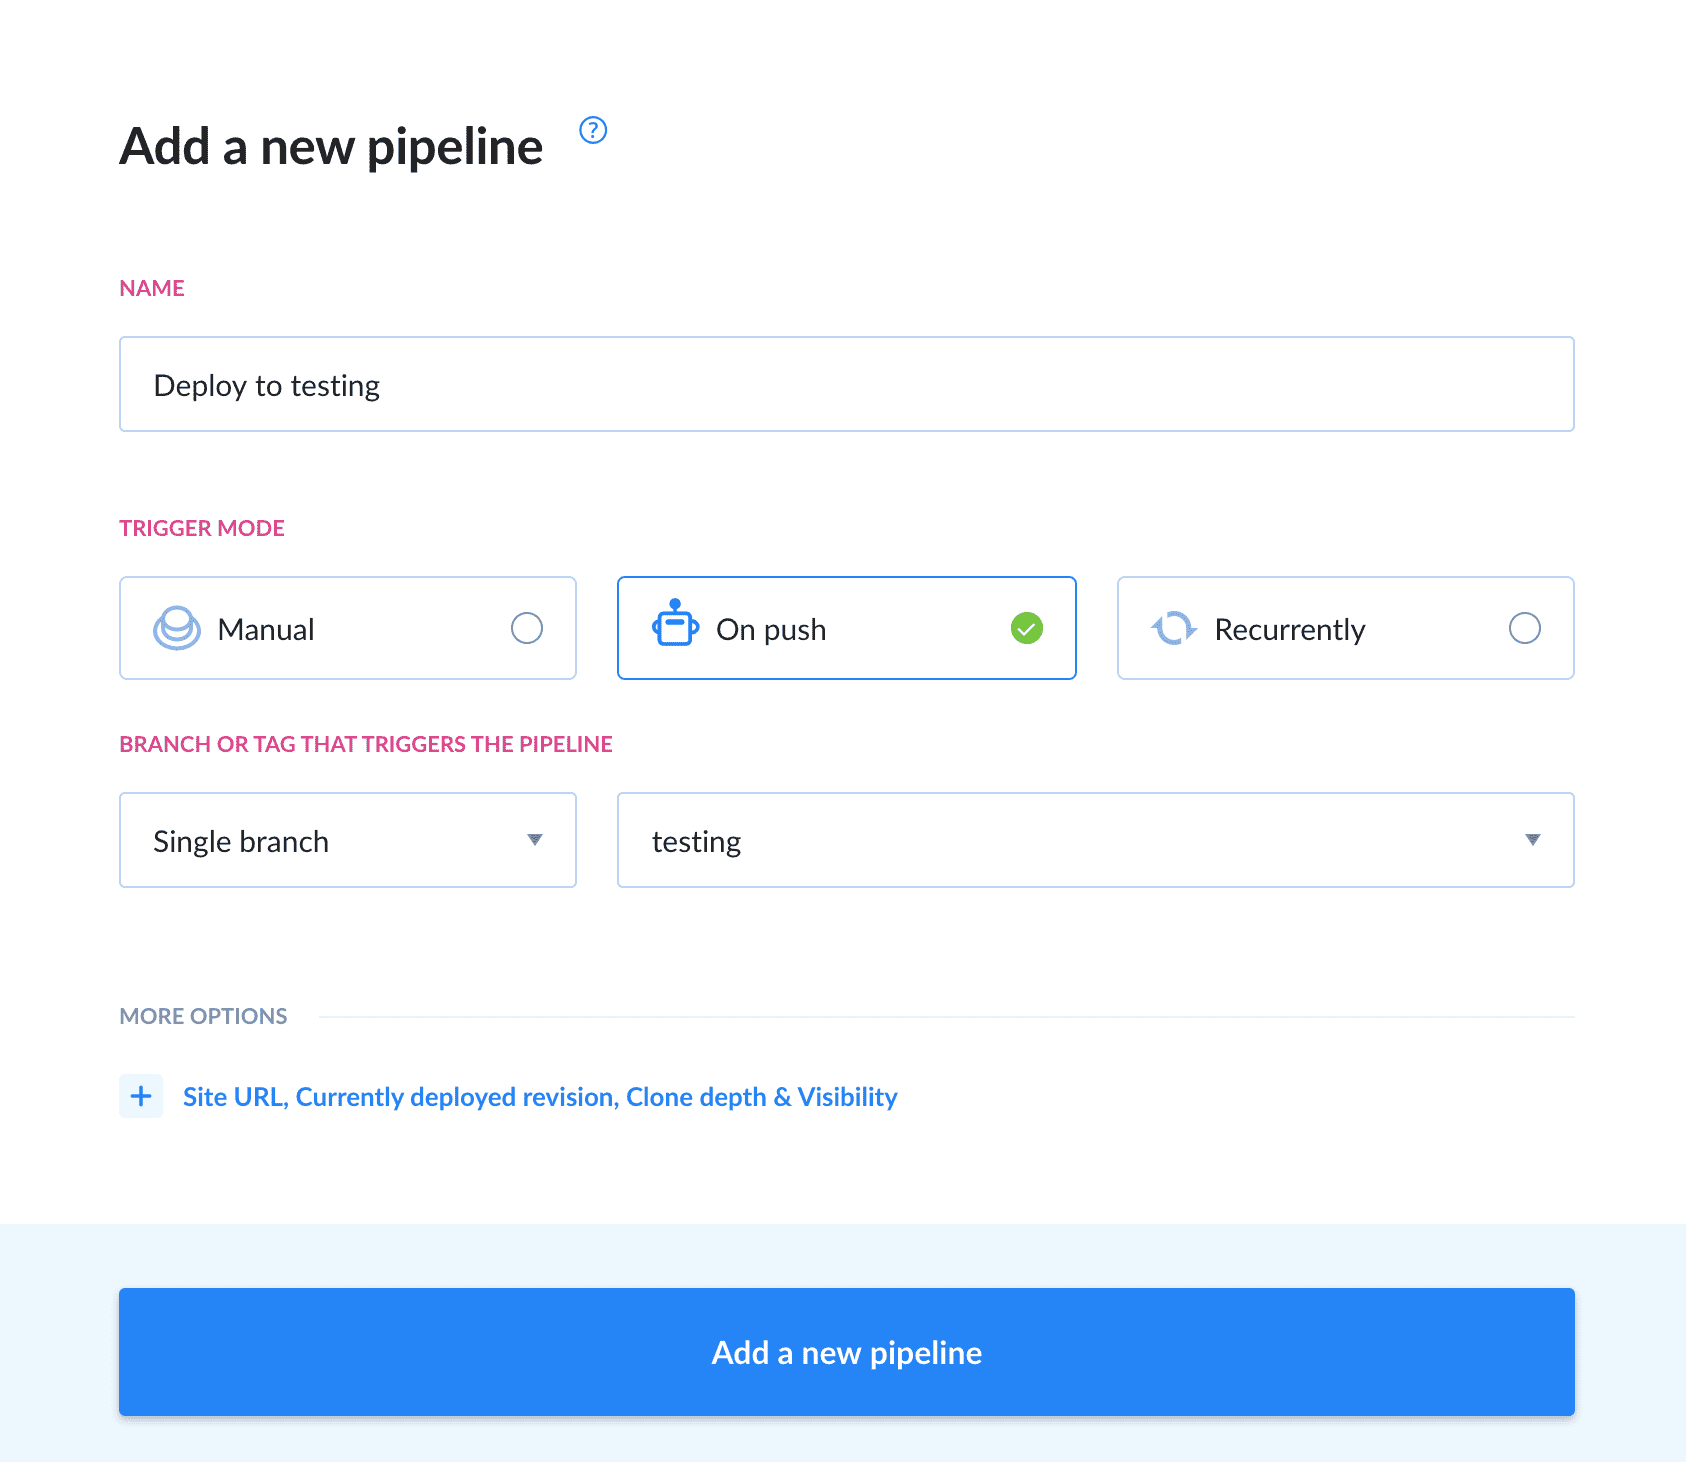 Configuring pipeline settings